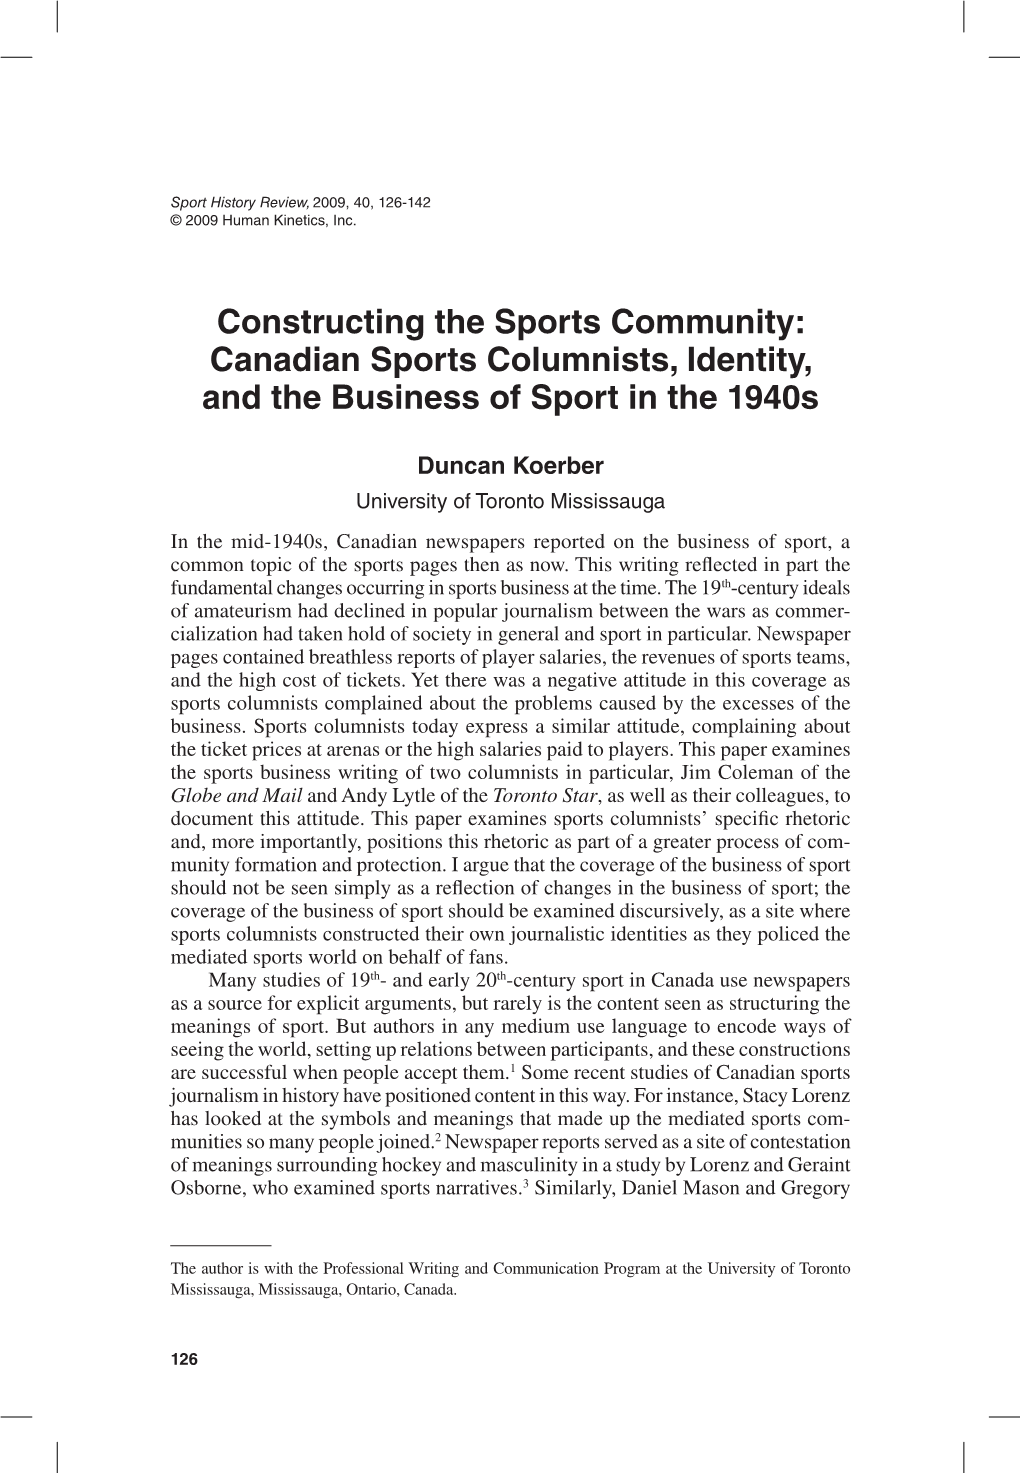 Canadian Sports Columnists, Identity, and the Business of Sport in the 1940S